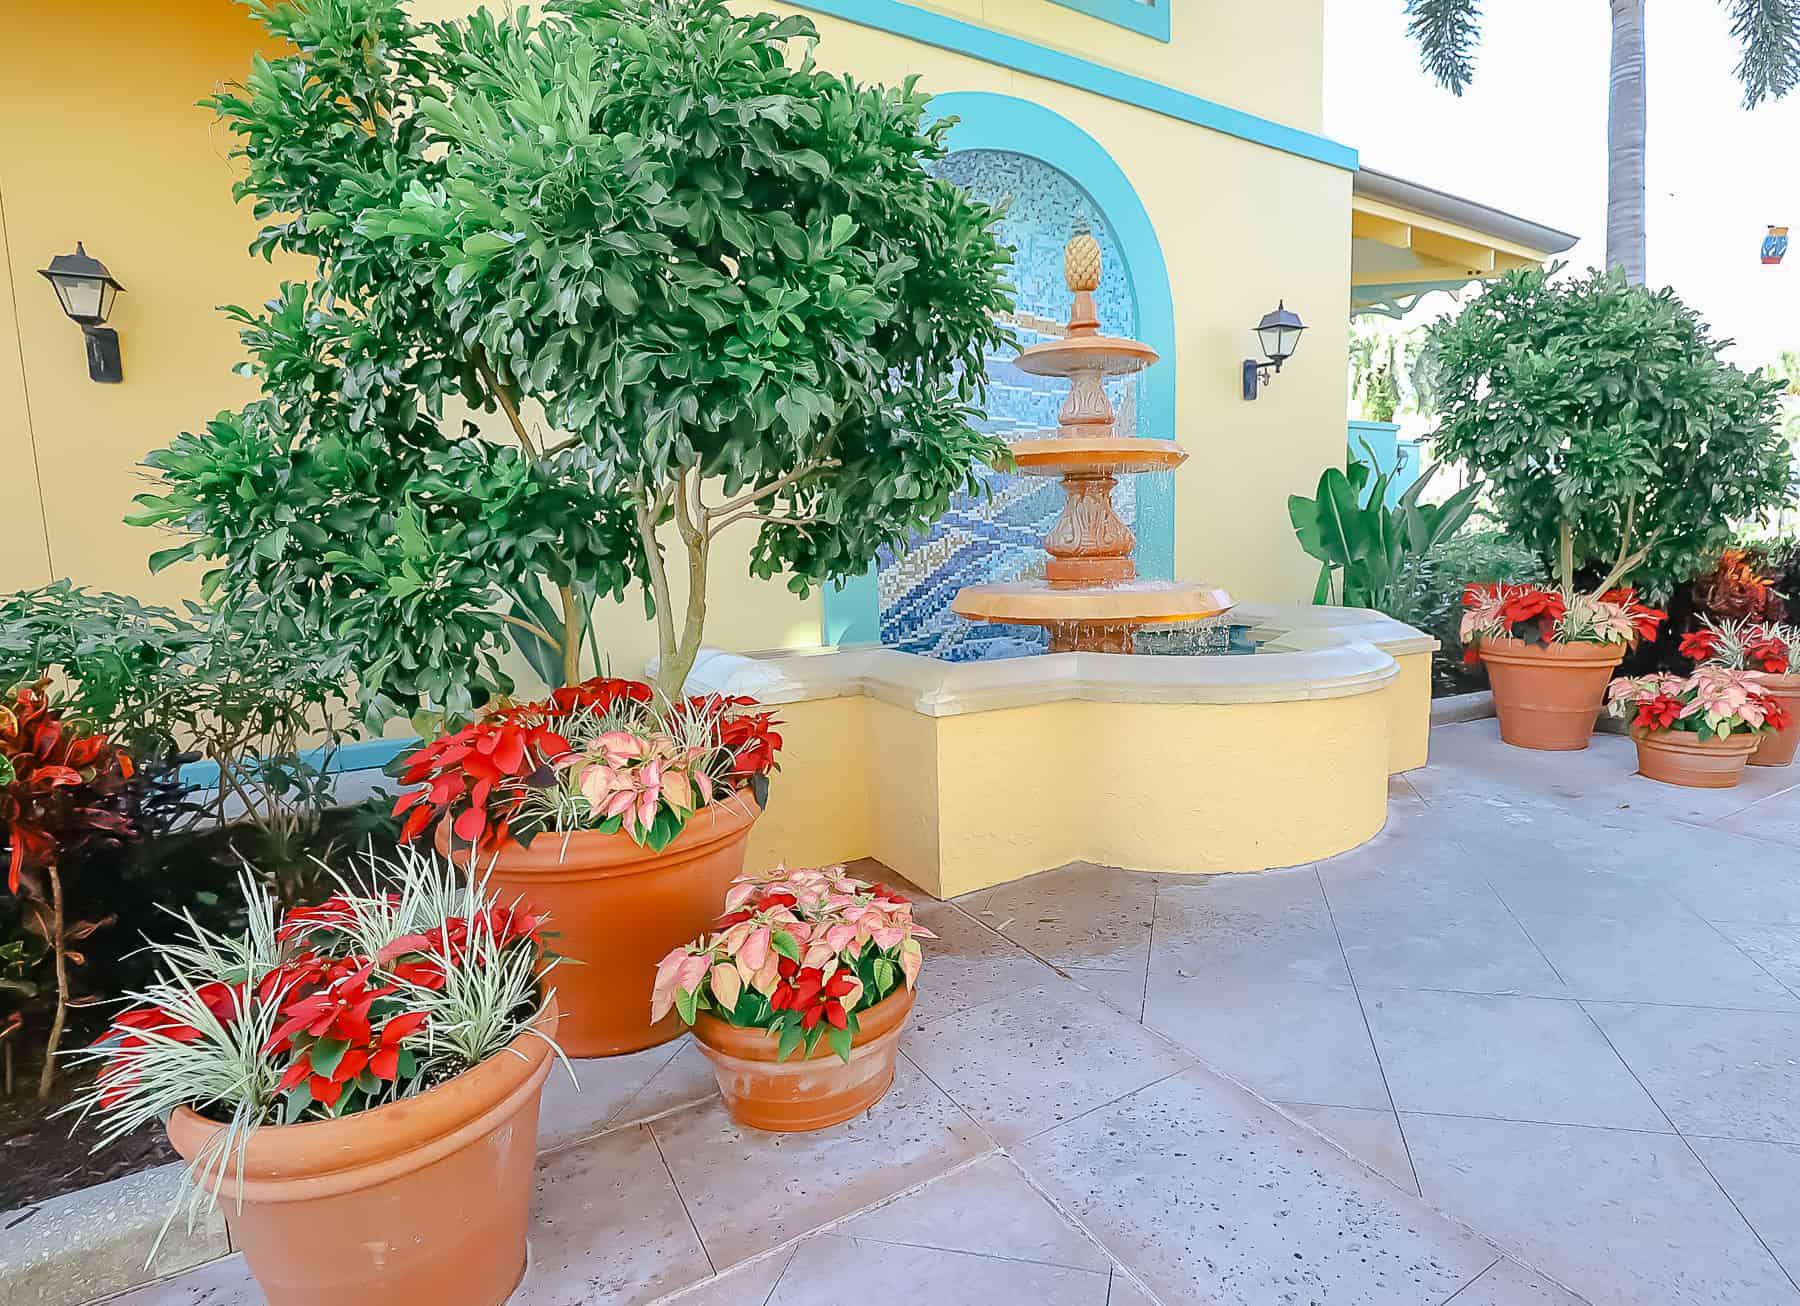 A fountain at Disney's Caribbean Beach surrounded by Christmas plants.